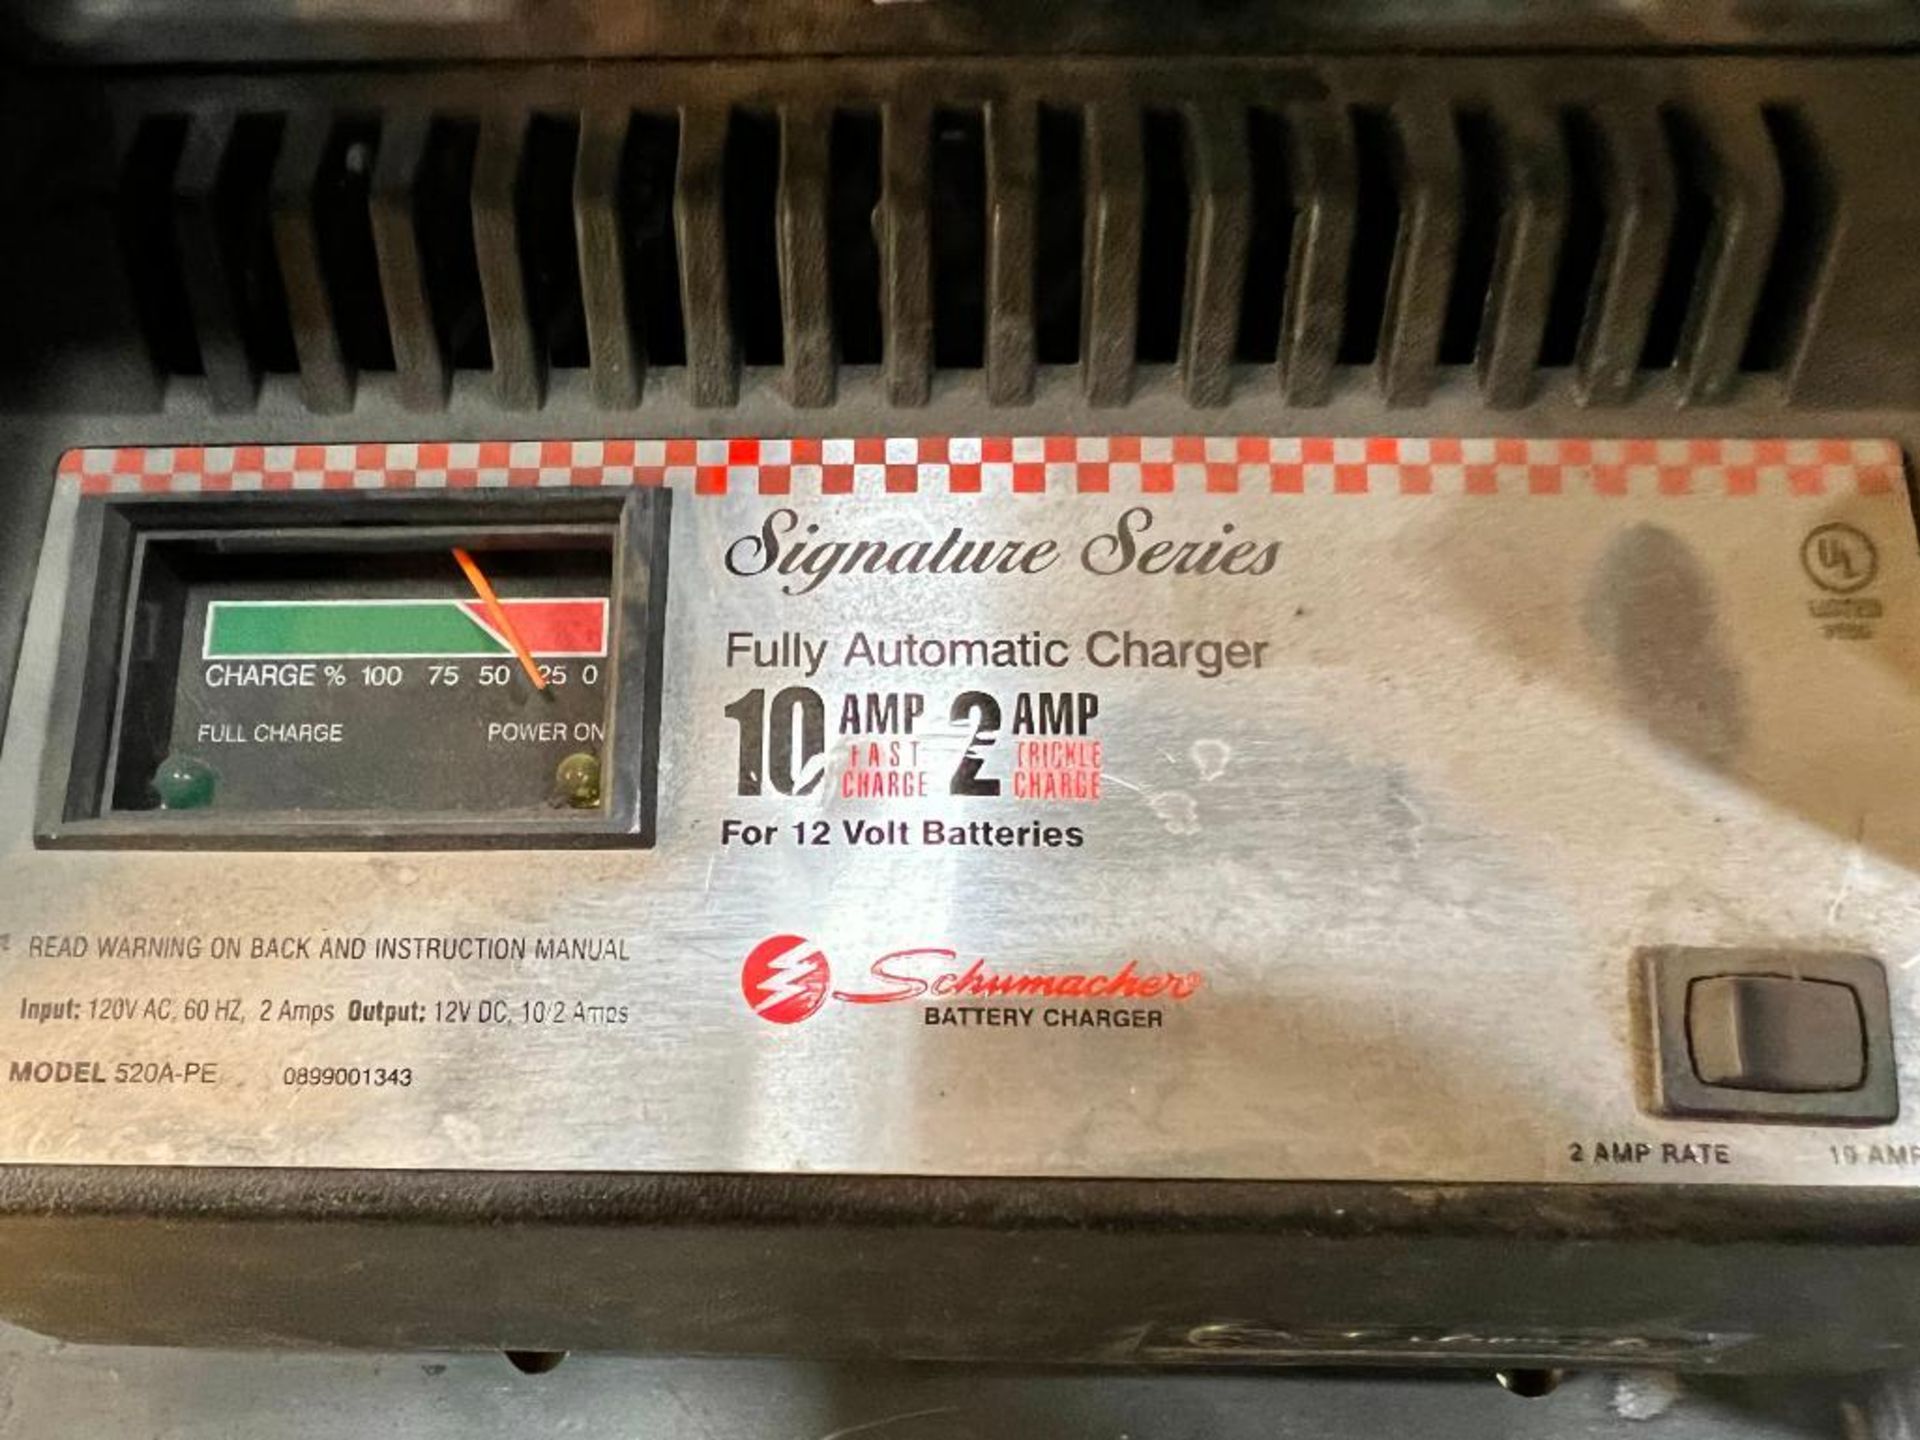 Schumacher Battery Charger, Signature Series For 12 V Batteries - Image 2 of 2